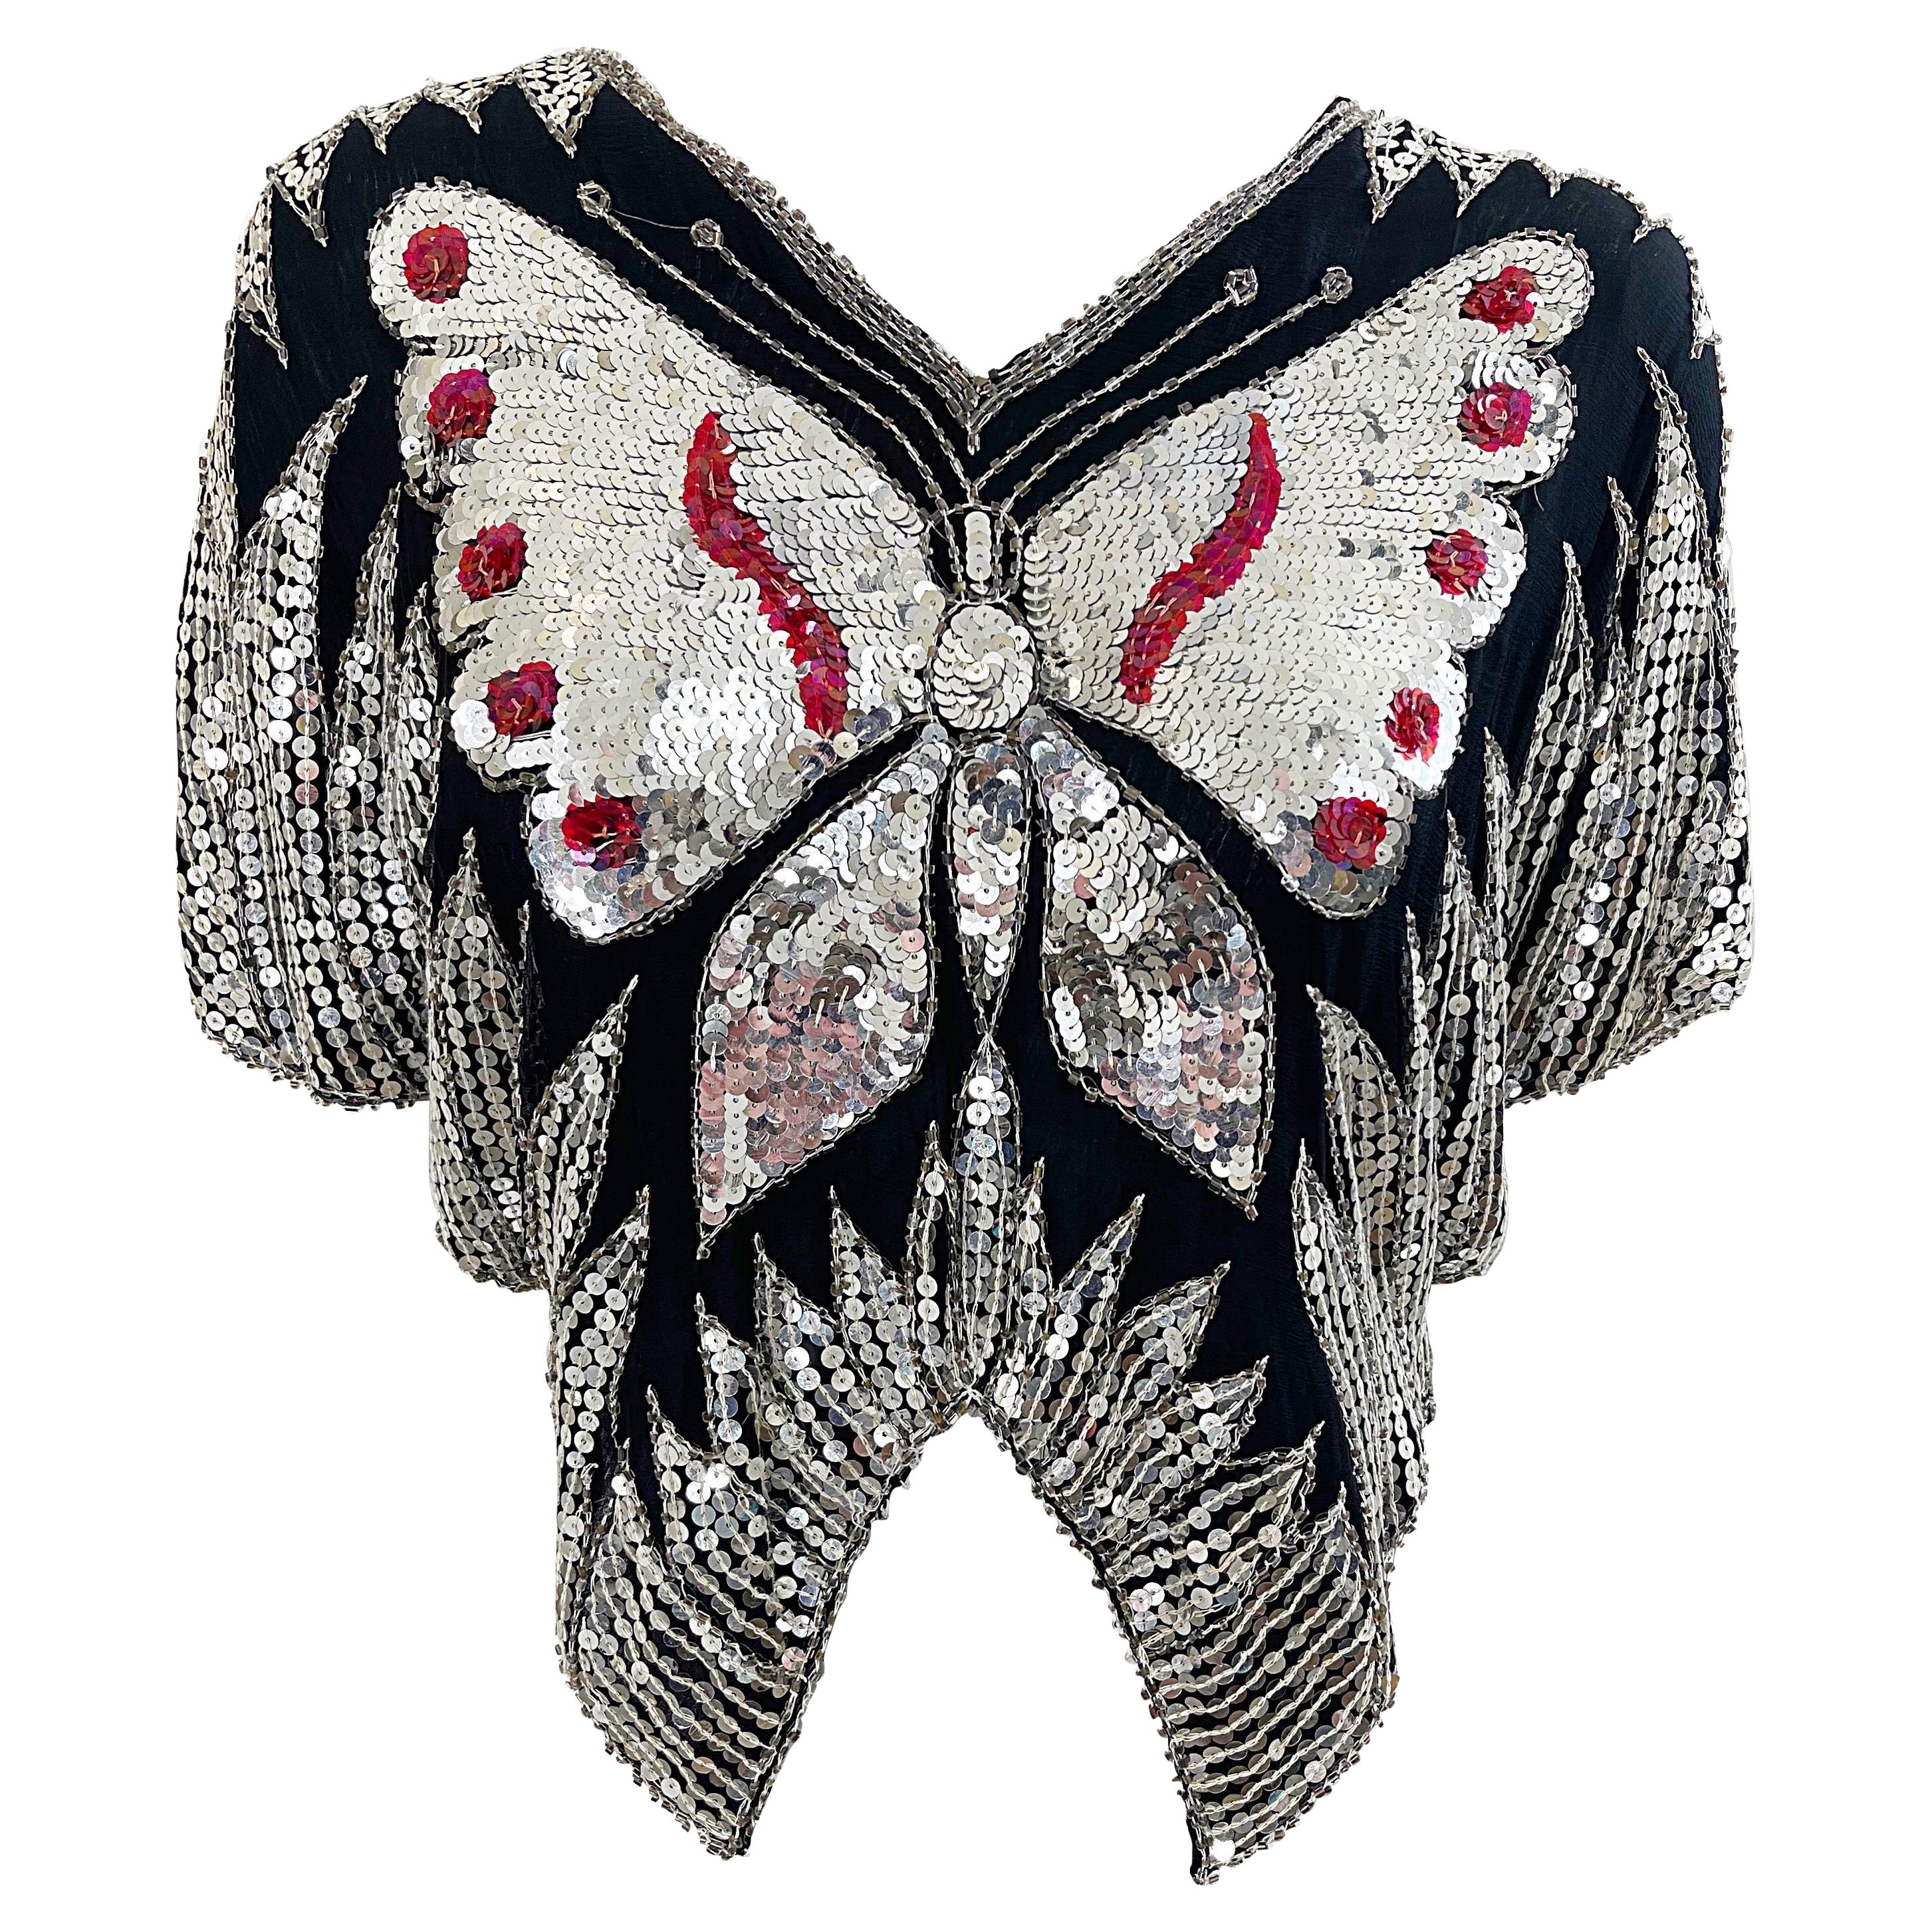 Studio 54 Early 1980s Butterfly Red Silver Black Sequin Disco Vintage 80s Top For Sale